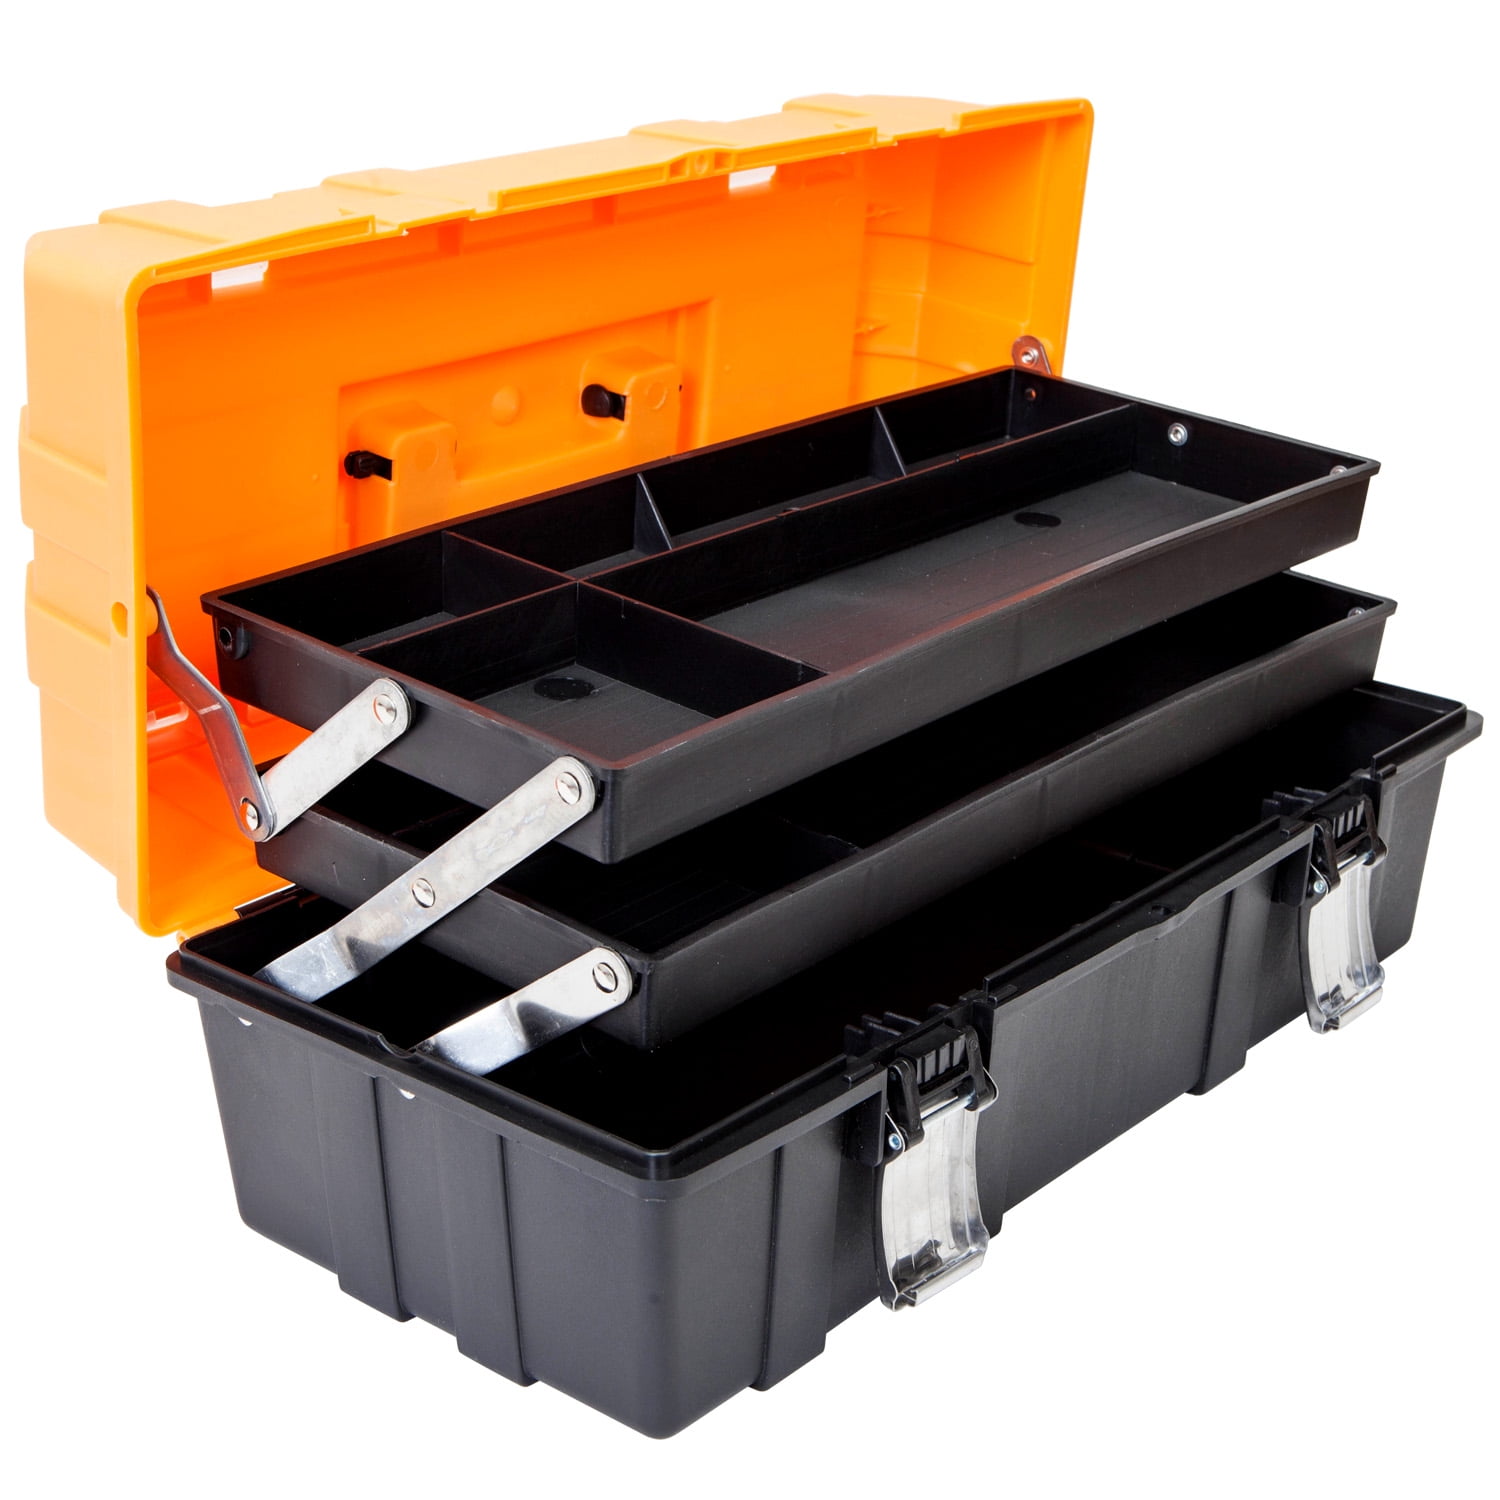 13" Strong Durable Plastic Tool Box Case DIY Hobby Storage Tote Tray 